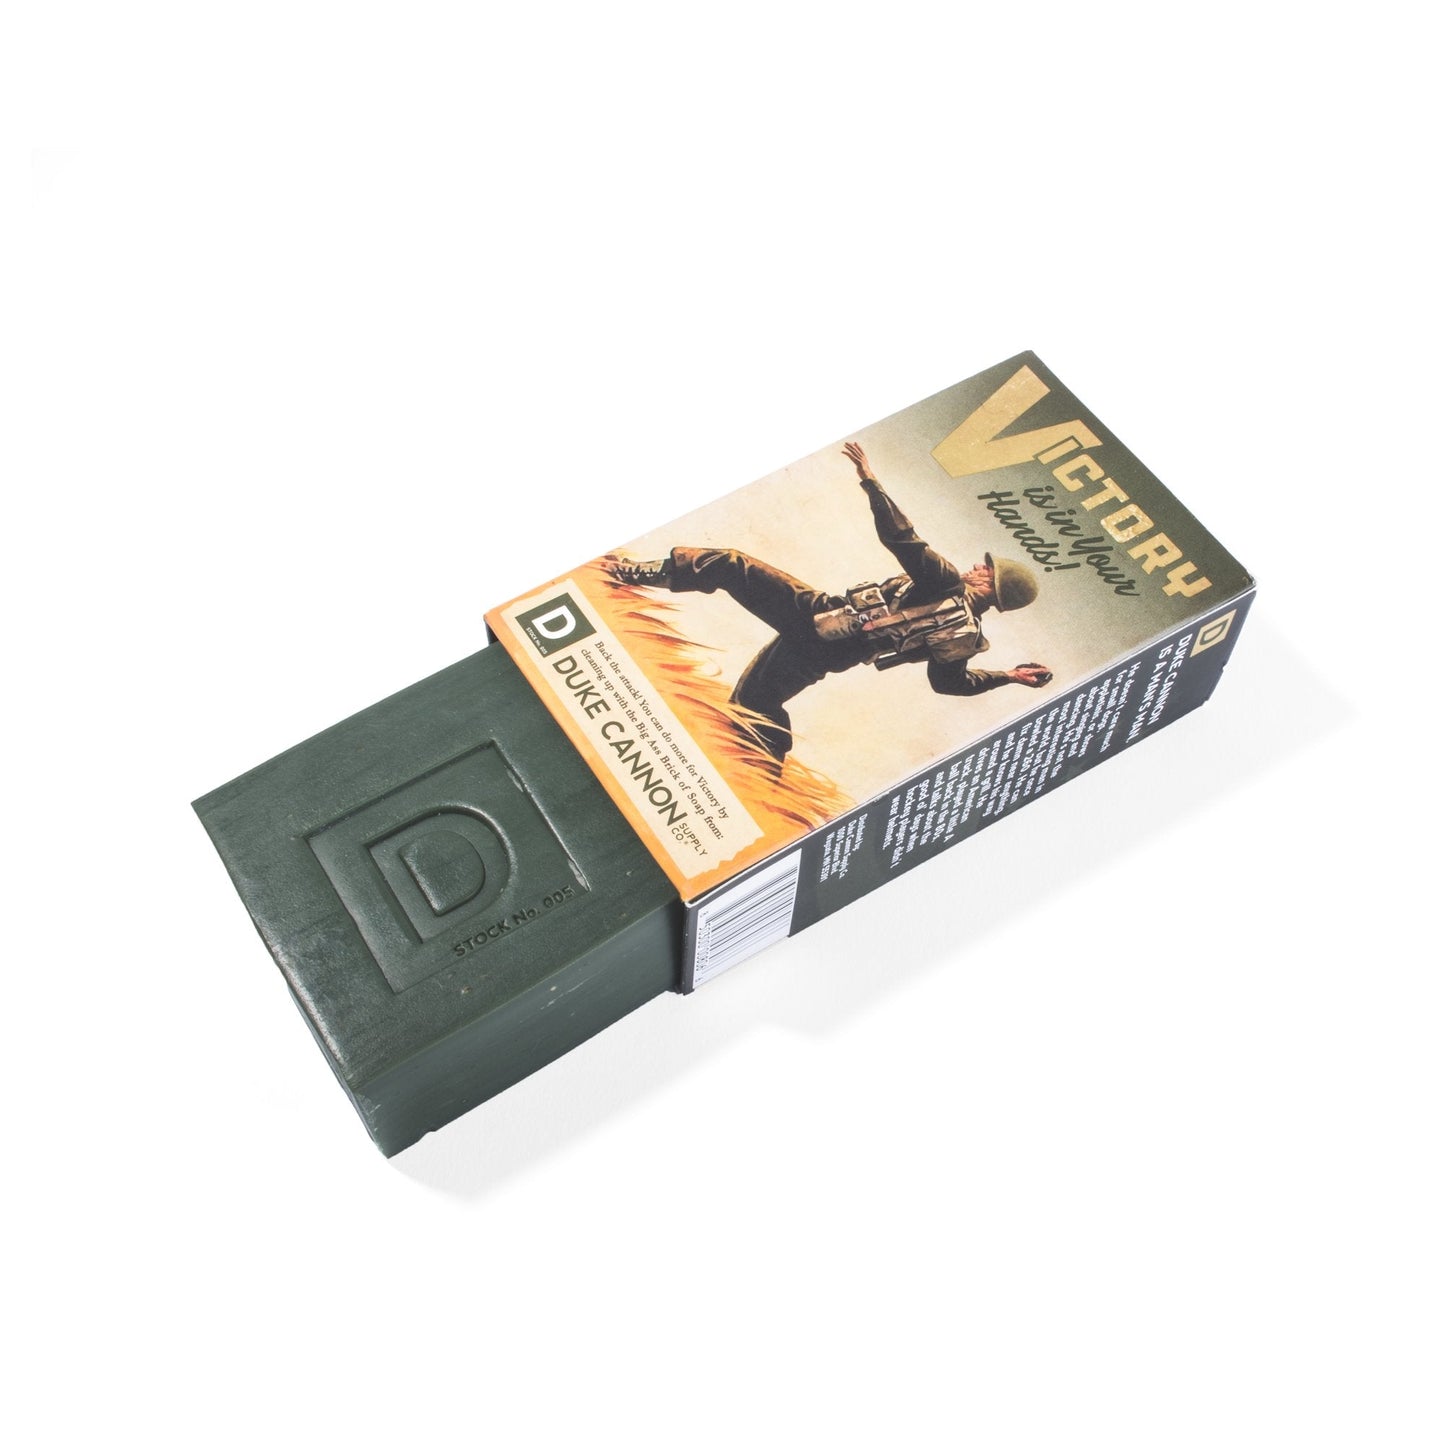 Limited Edition WWII Era Smells Like Victory Men's Soap Bar